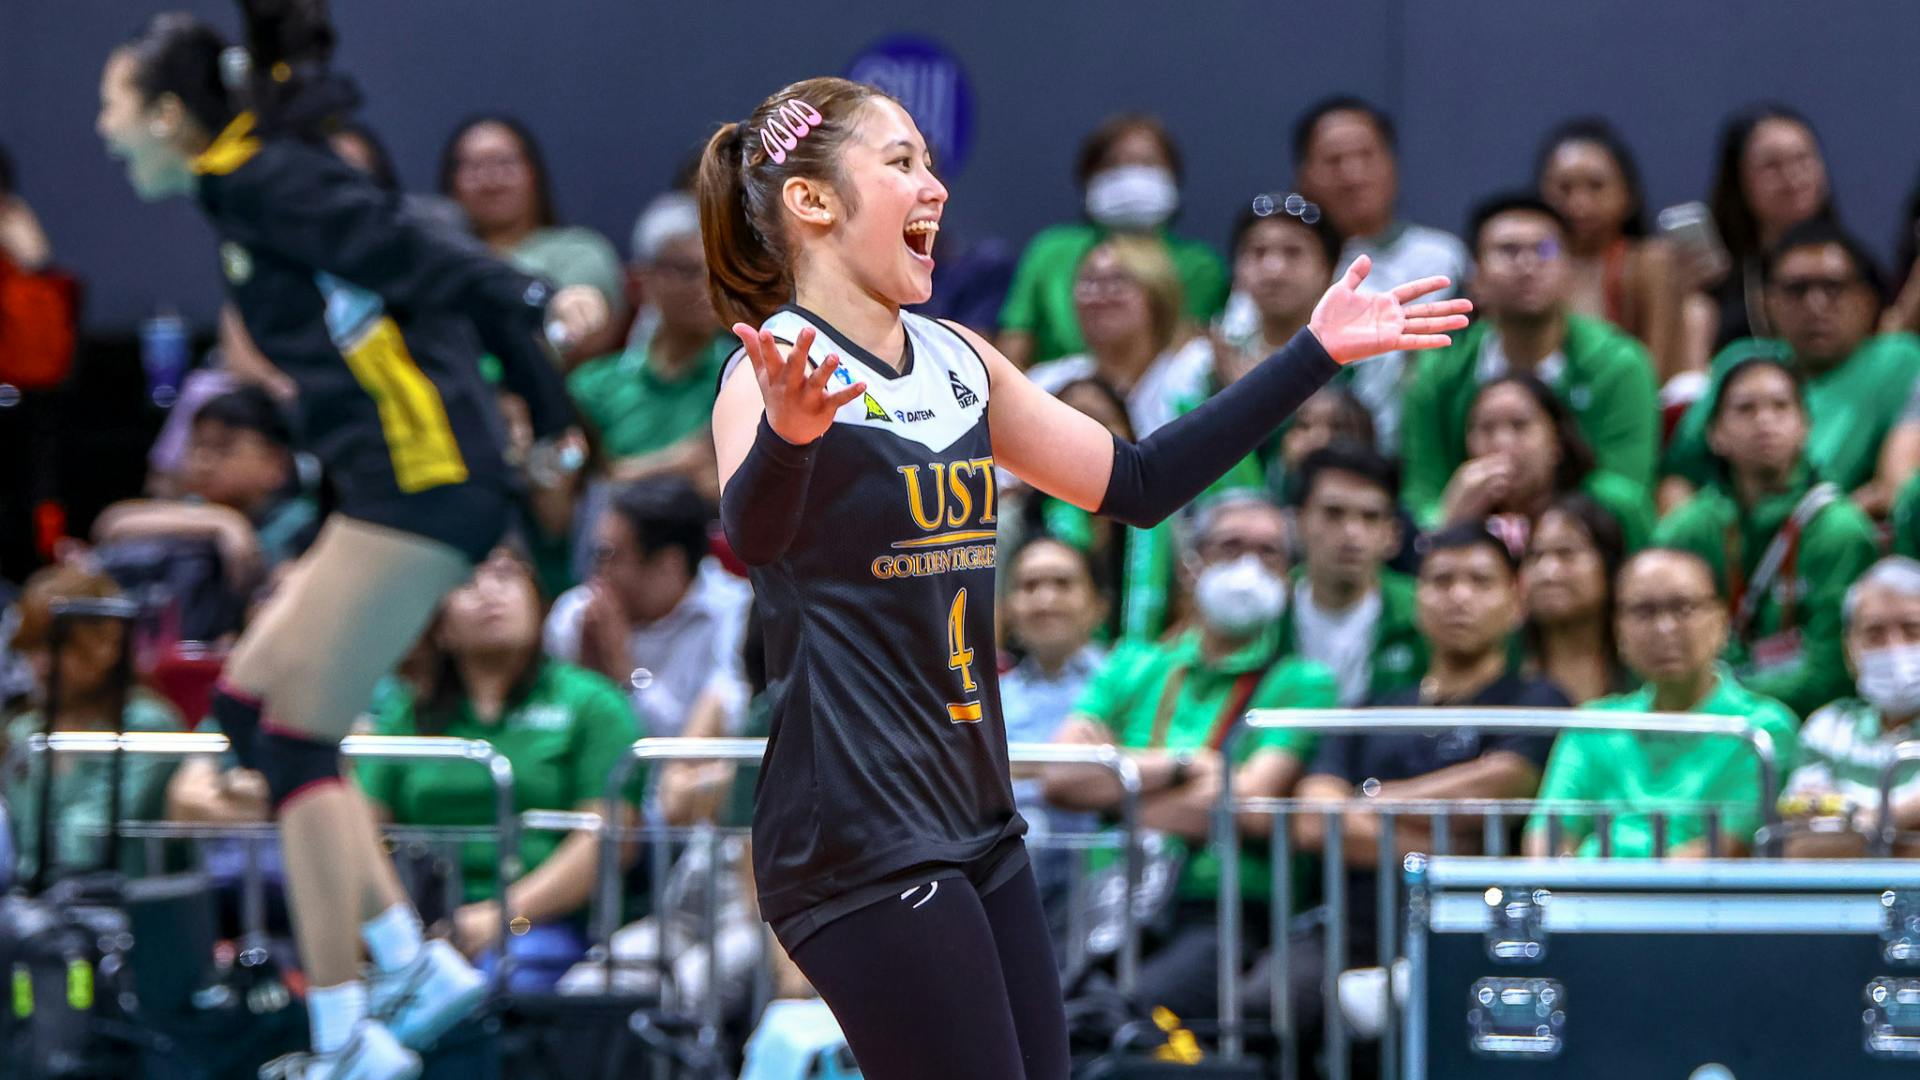 Uaap Ust Sends Strong Statement With Five Set Conquest Of Champion La